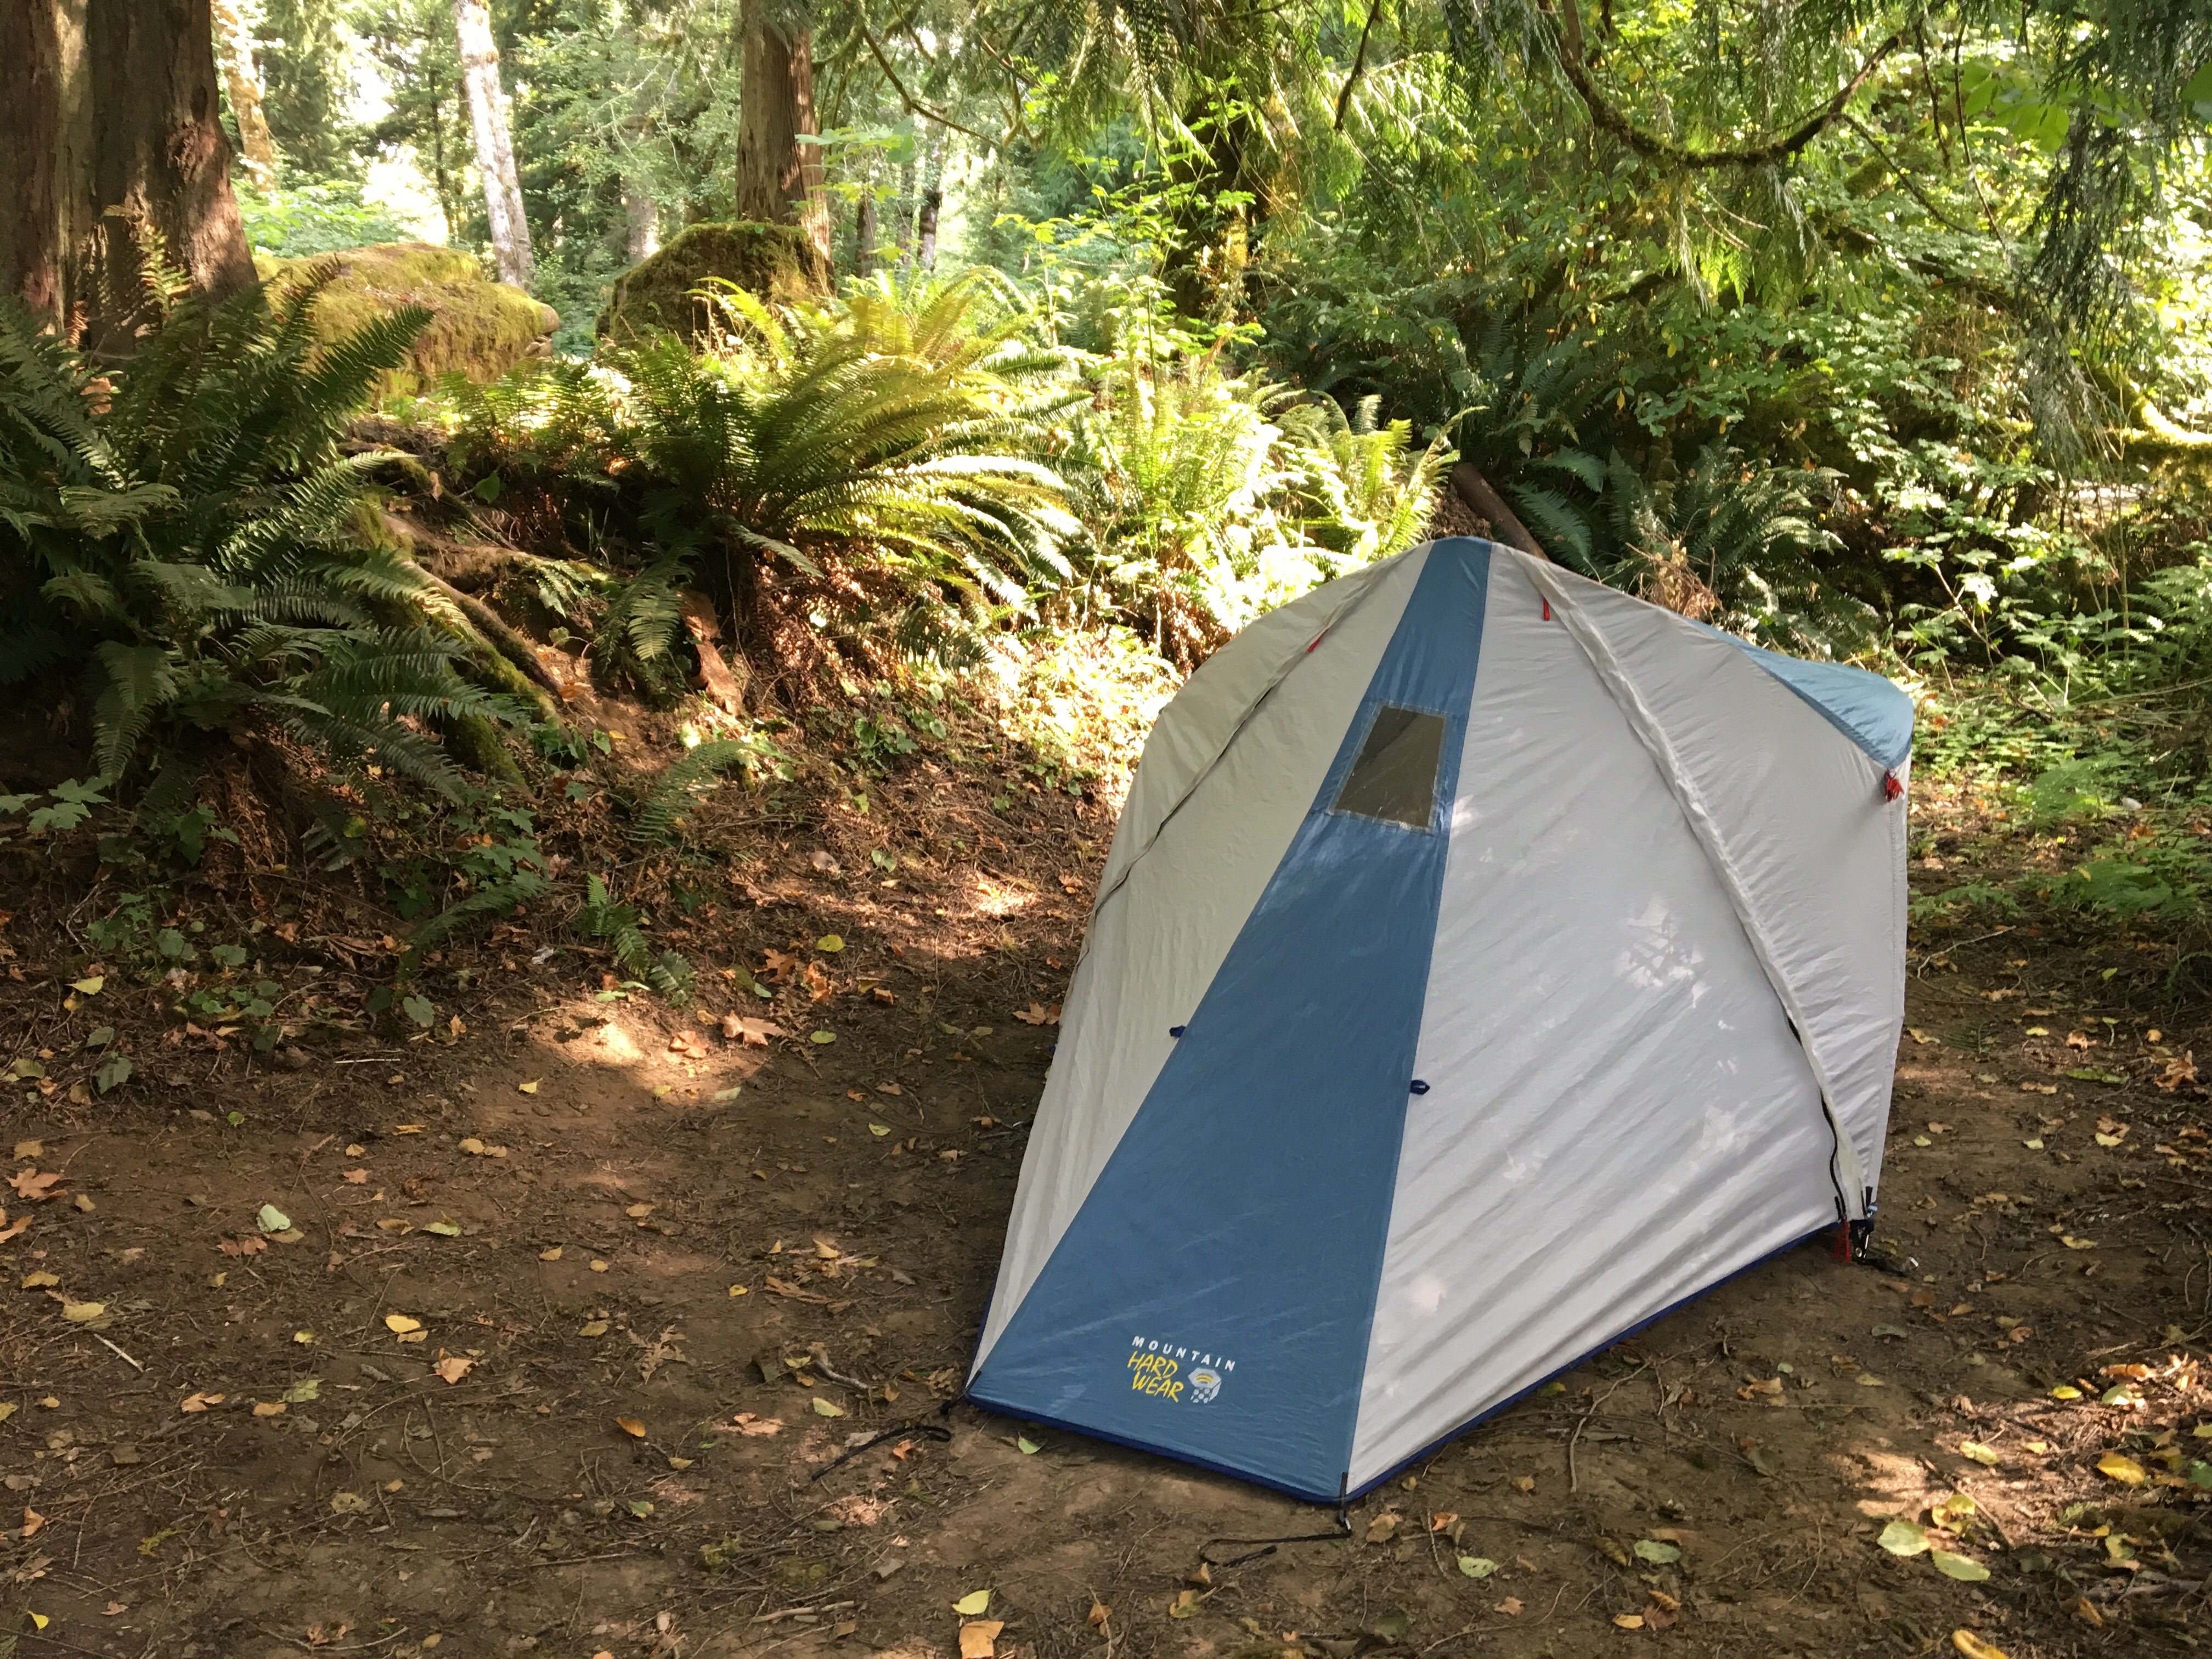 Camper submitted image from Lyre River Campground - 5